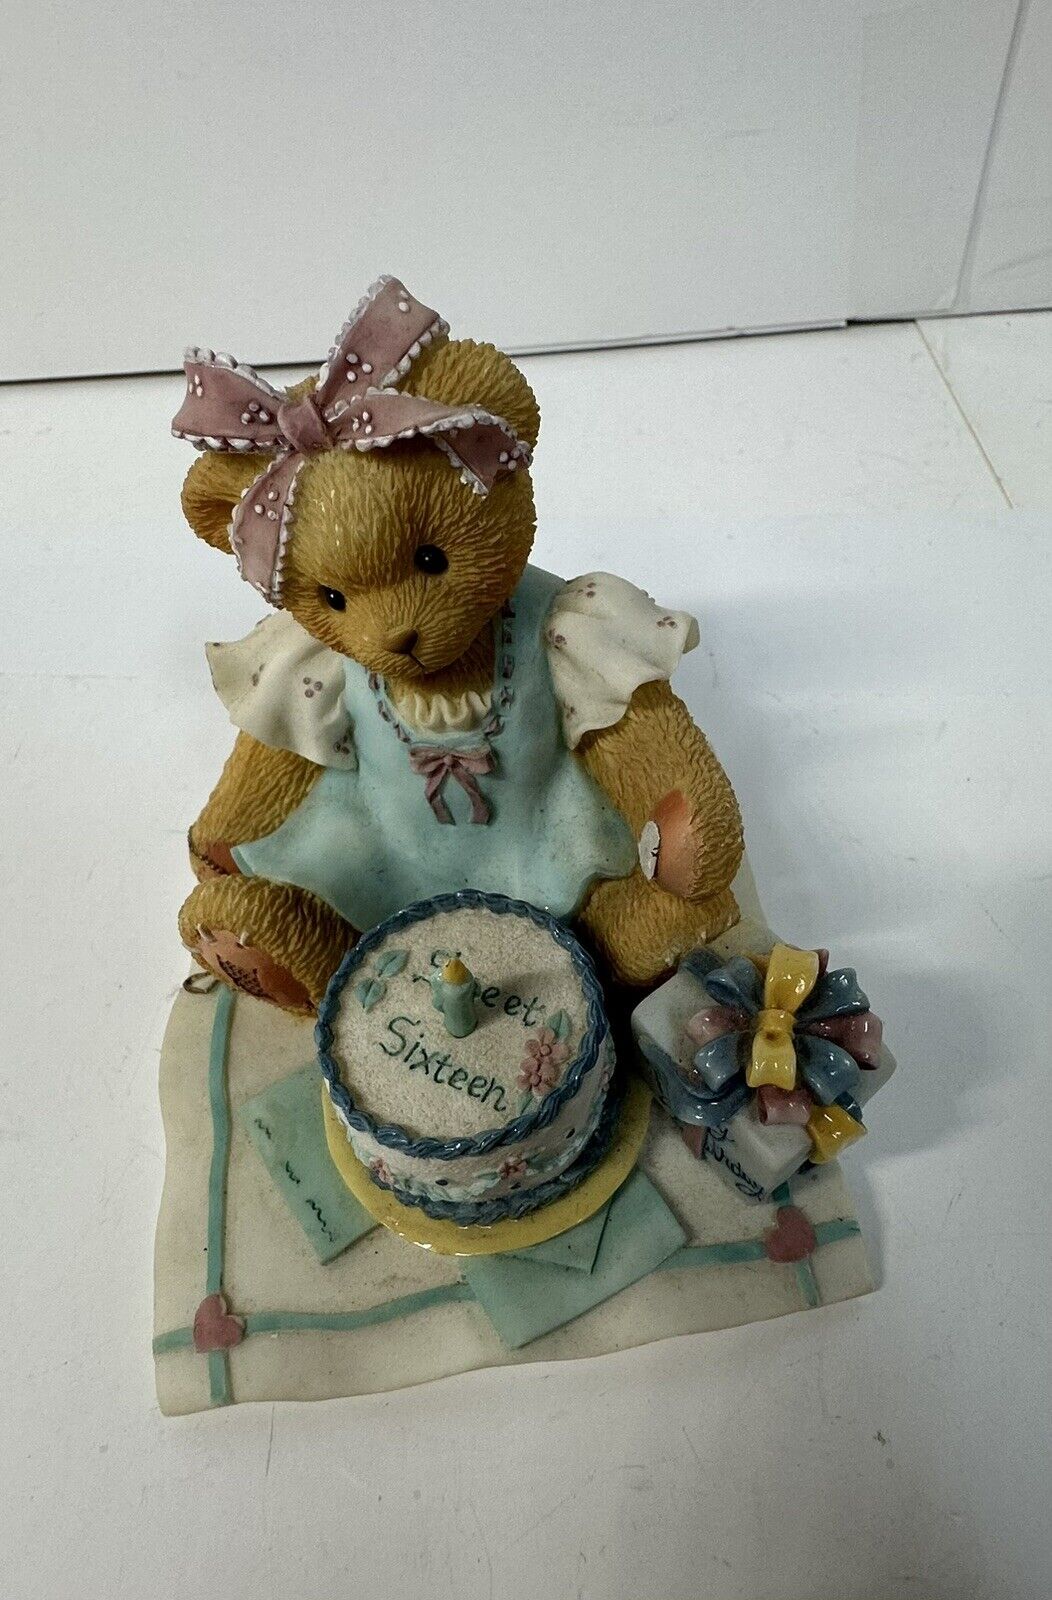 1997 Enesco Cherished Teddies Sixteen Candles and Many More Wishes Figurine